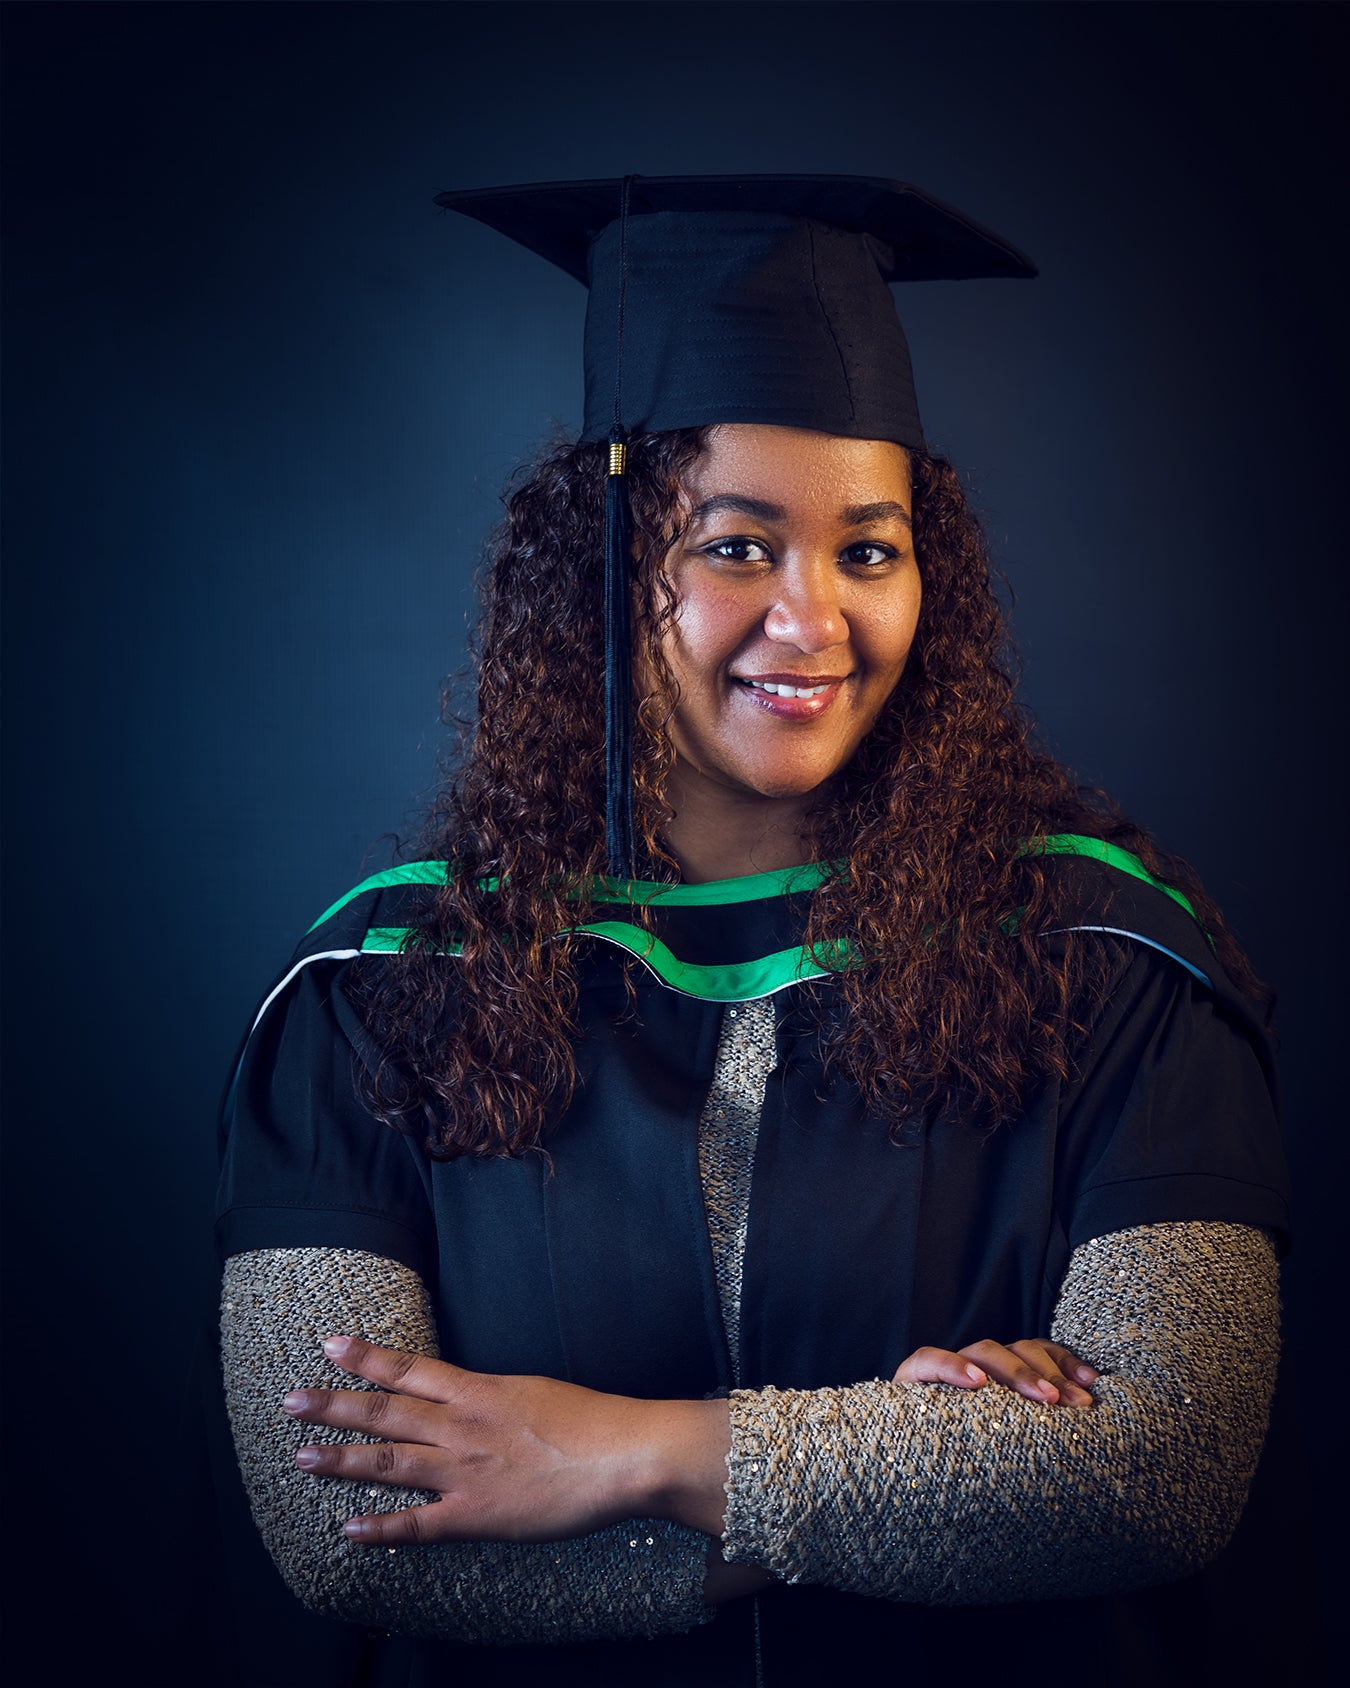 How to hire your academic dress and Photographs with William Northam